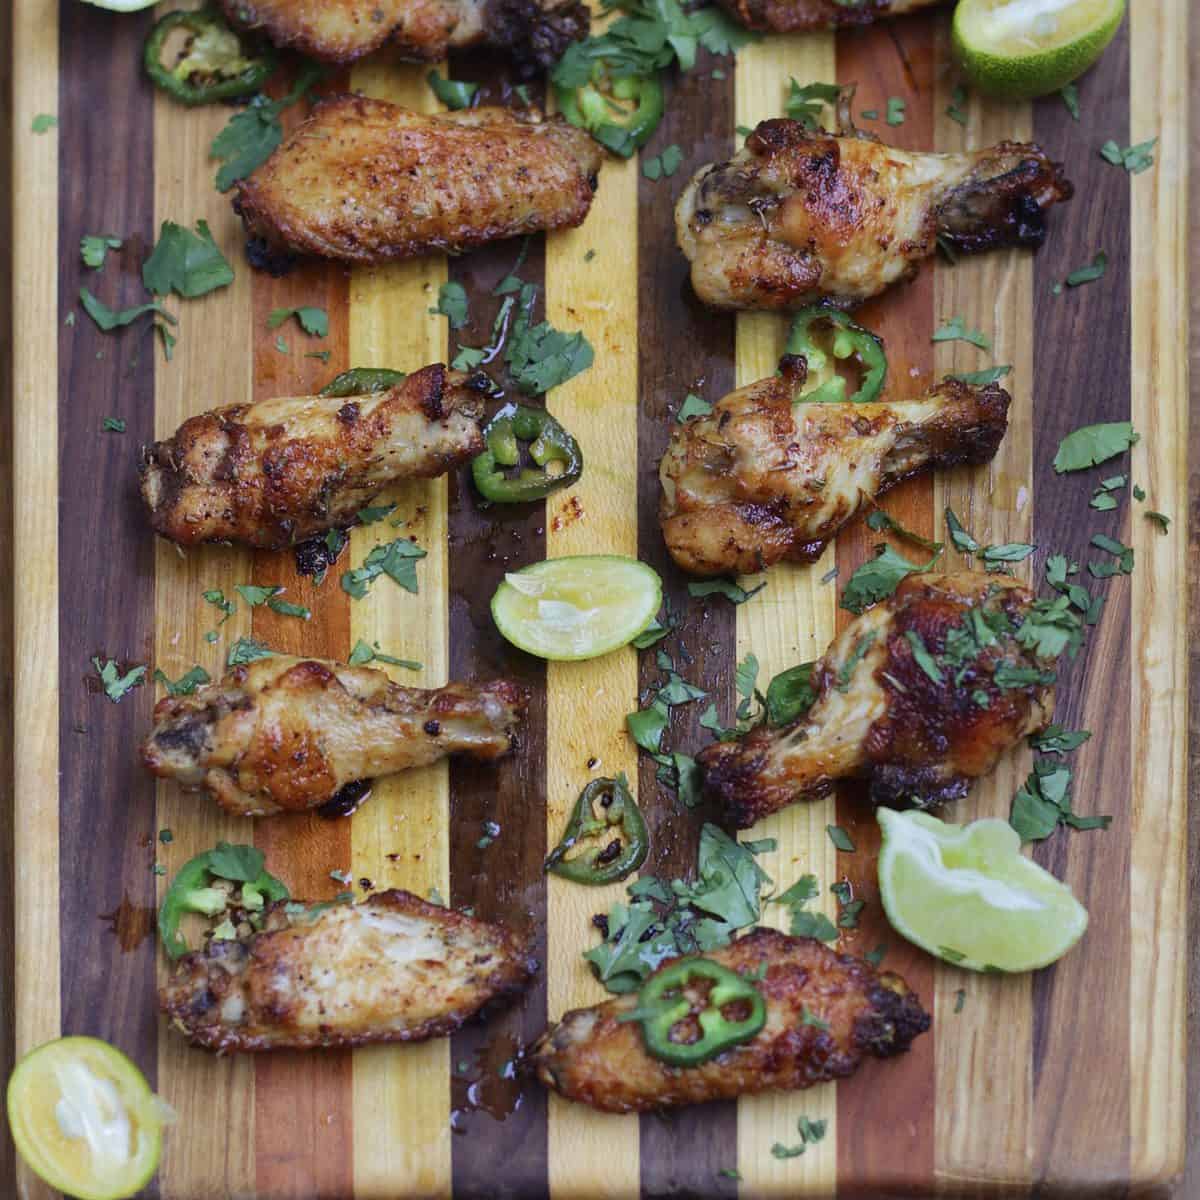 https://evseats.com/wp-content/uploads/2017/11/Creole-Butter-Chicken-Wings-scaled.jpg